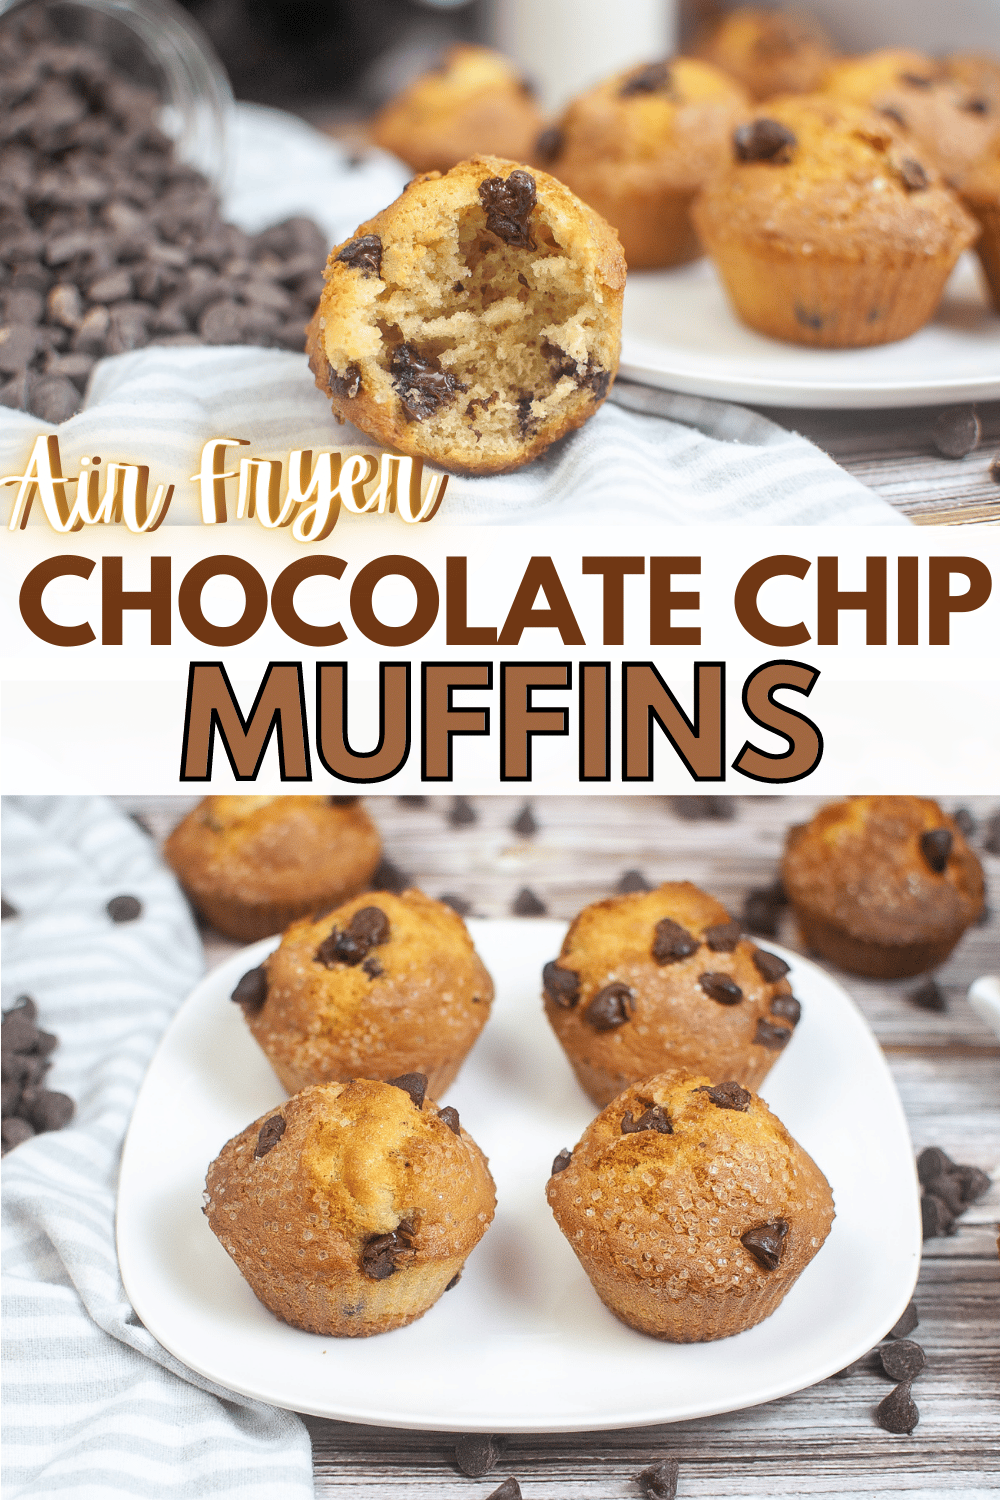 top image is half of a  Chocolate Chip Muffin with more muffins and chocolate chips in the background, bottom image is Air Fryer Chocolate Chip Muffins on a white plate with more muffins and chocolate chips in the background, and title text in between is Air Fryer Chocolate Chip Muffins